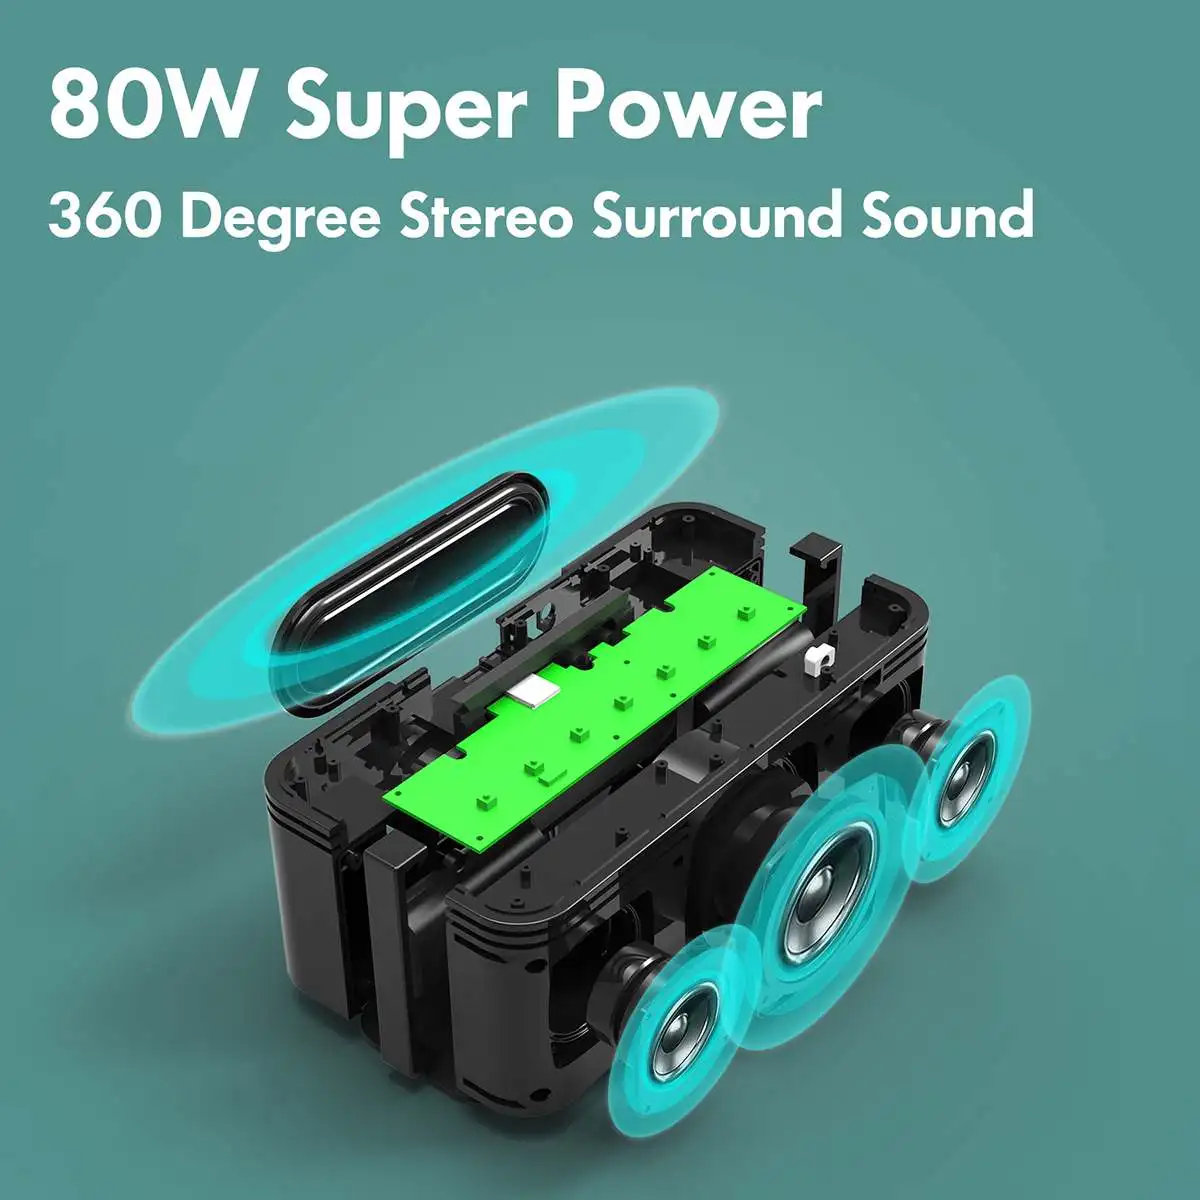 INSMA S800 80W Portable Bluetooth Speaker With 2*20w Power Amplifiers and 40w Bass Speaker Can be used as a Power Bank 10400mAh